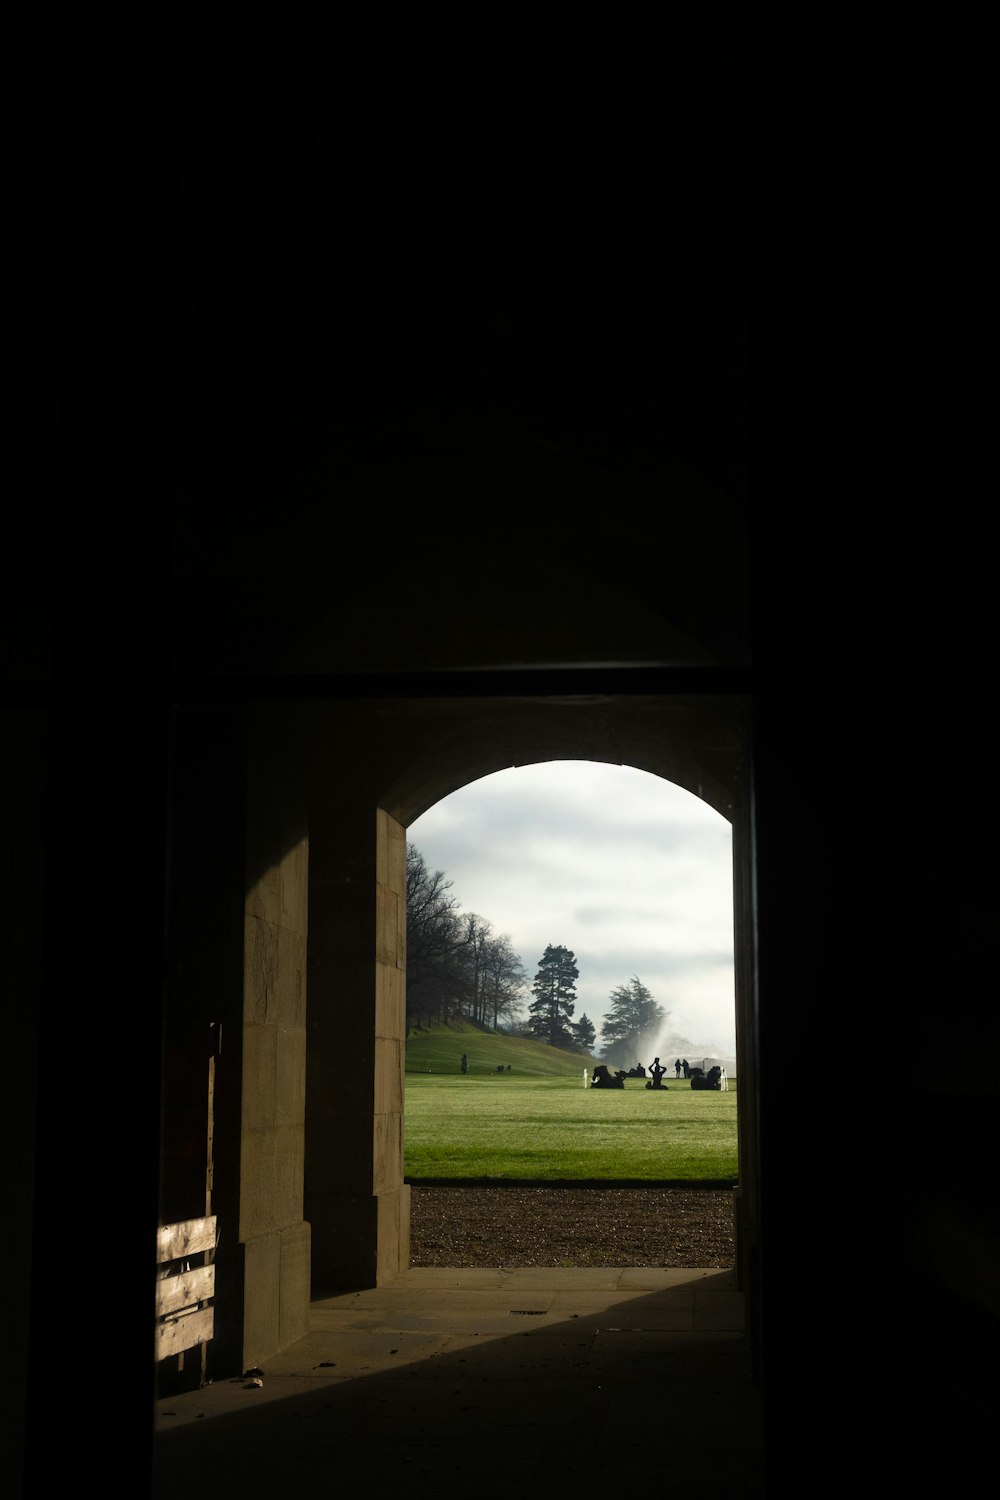 a view of a grassy field through an archway